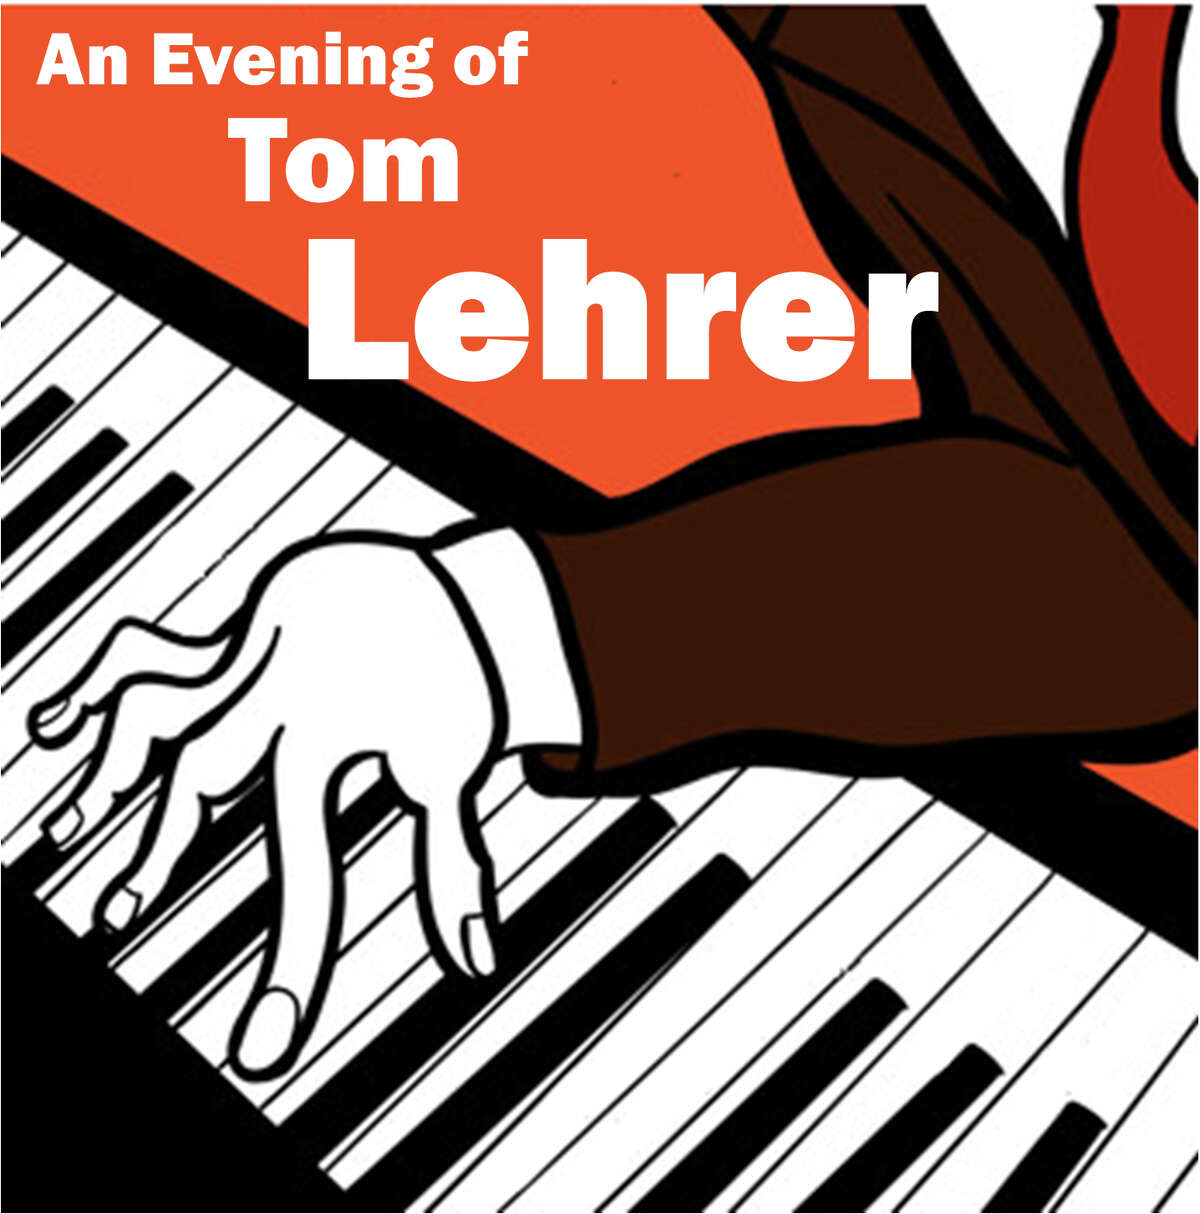 Creative 360 will present "An Evening of Tom Lehrer" on May 13.